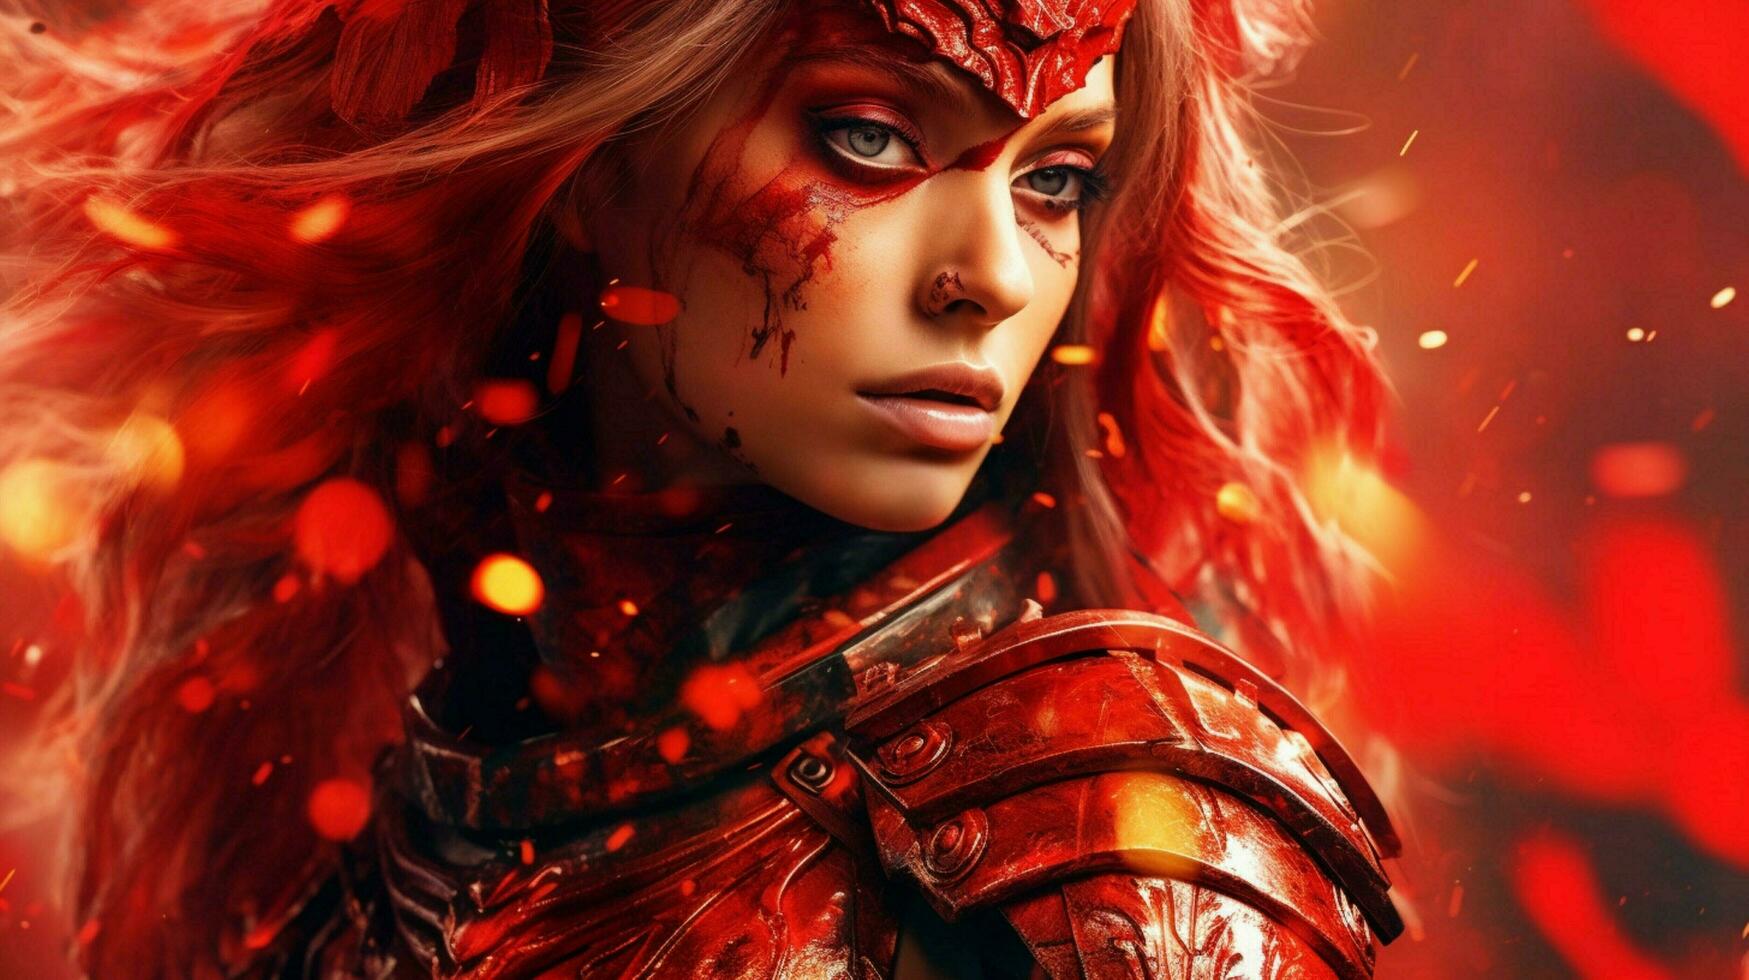 warrior gaming woman red fictional world photo